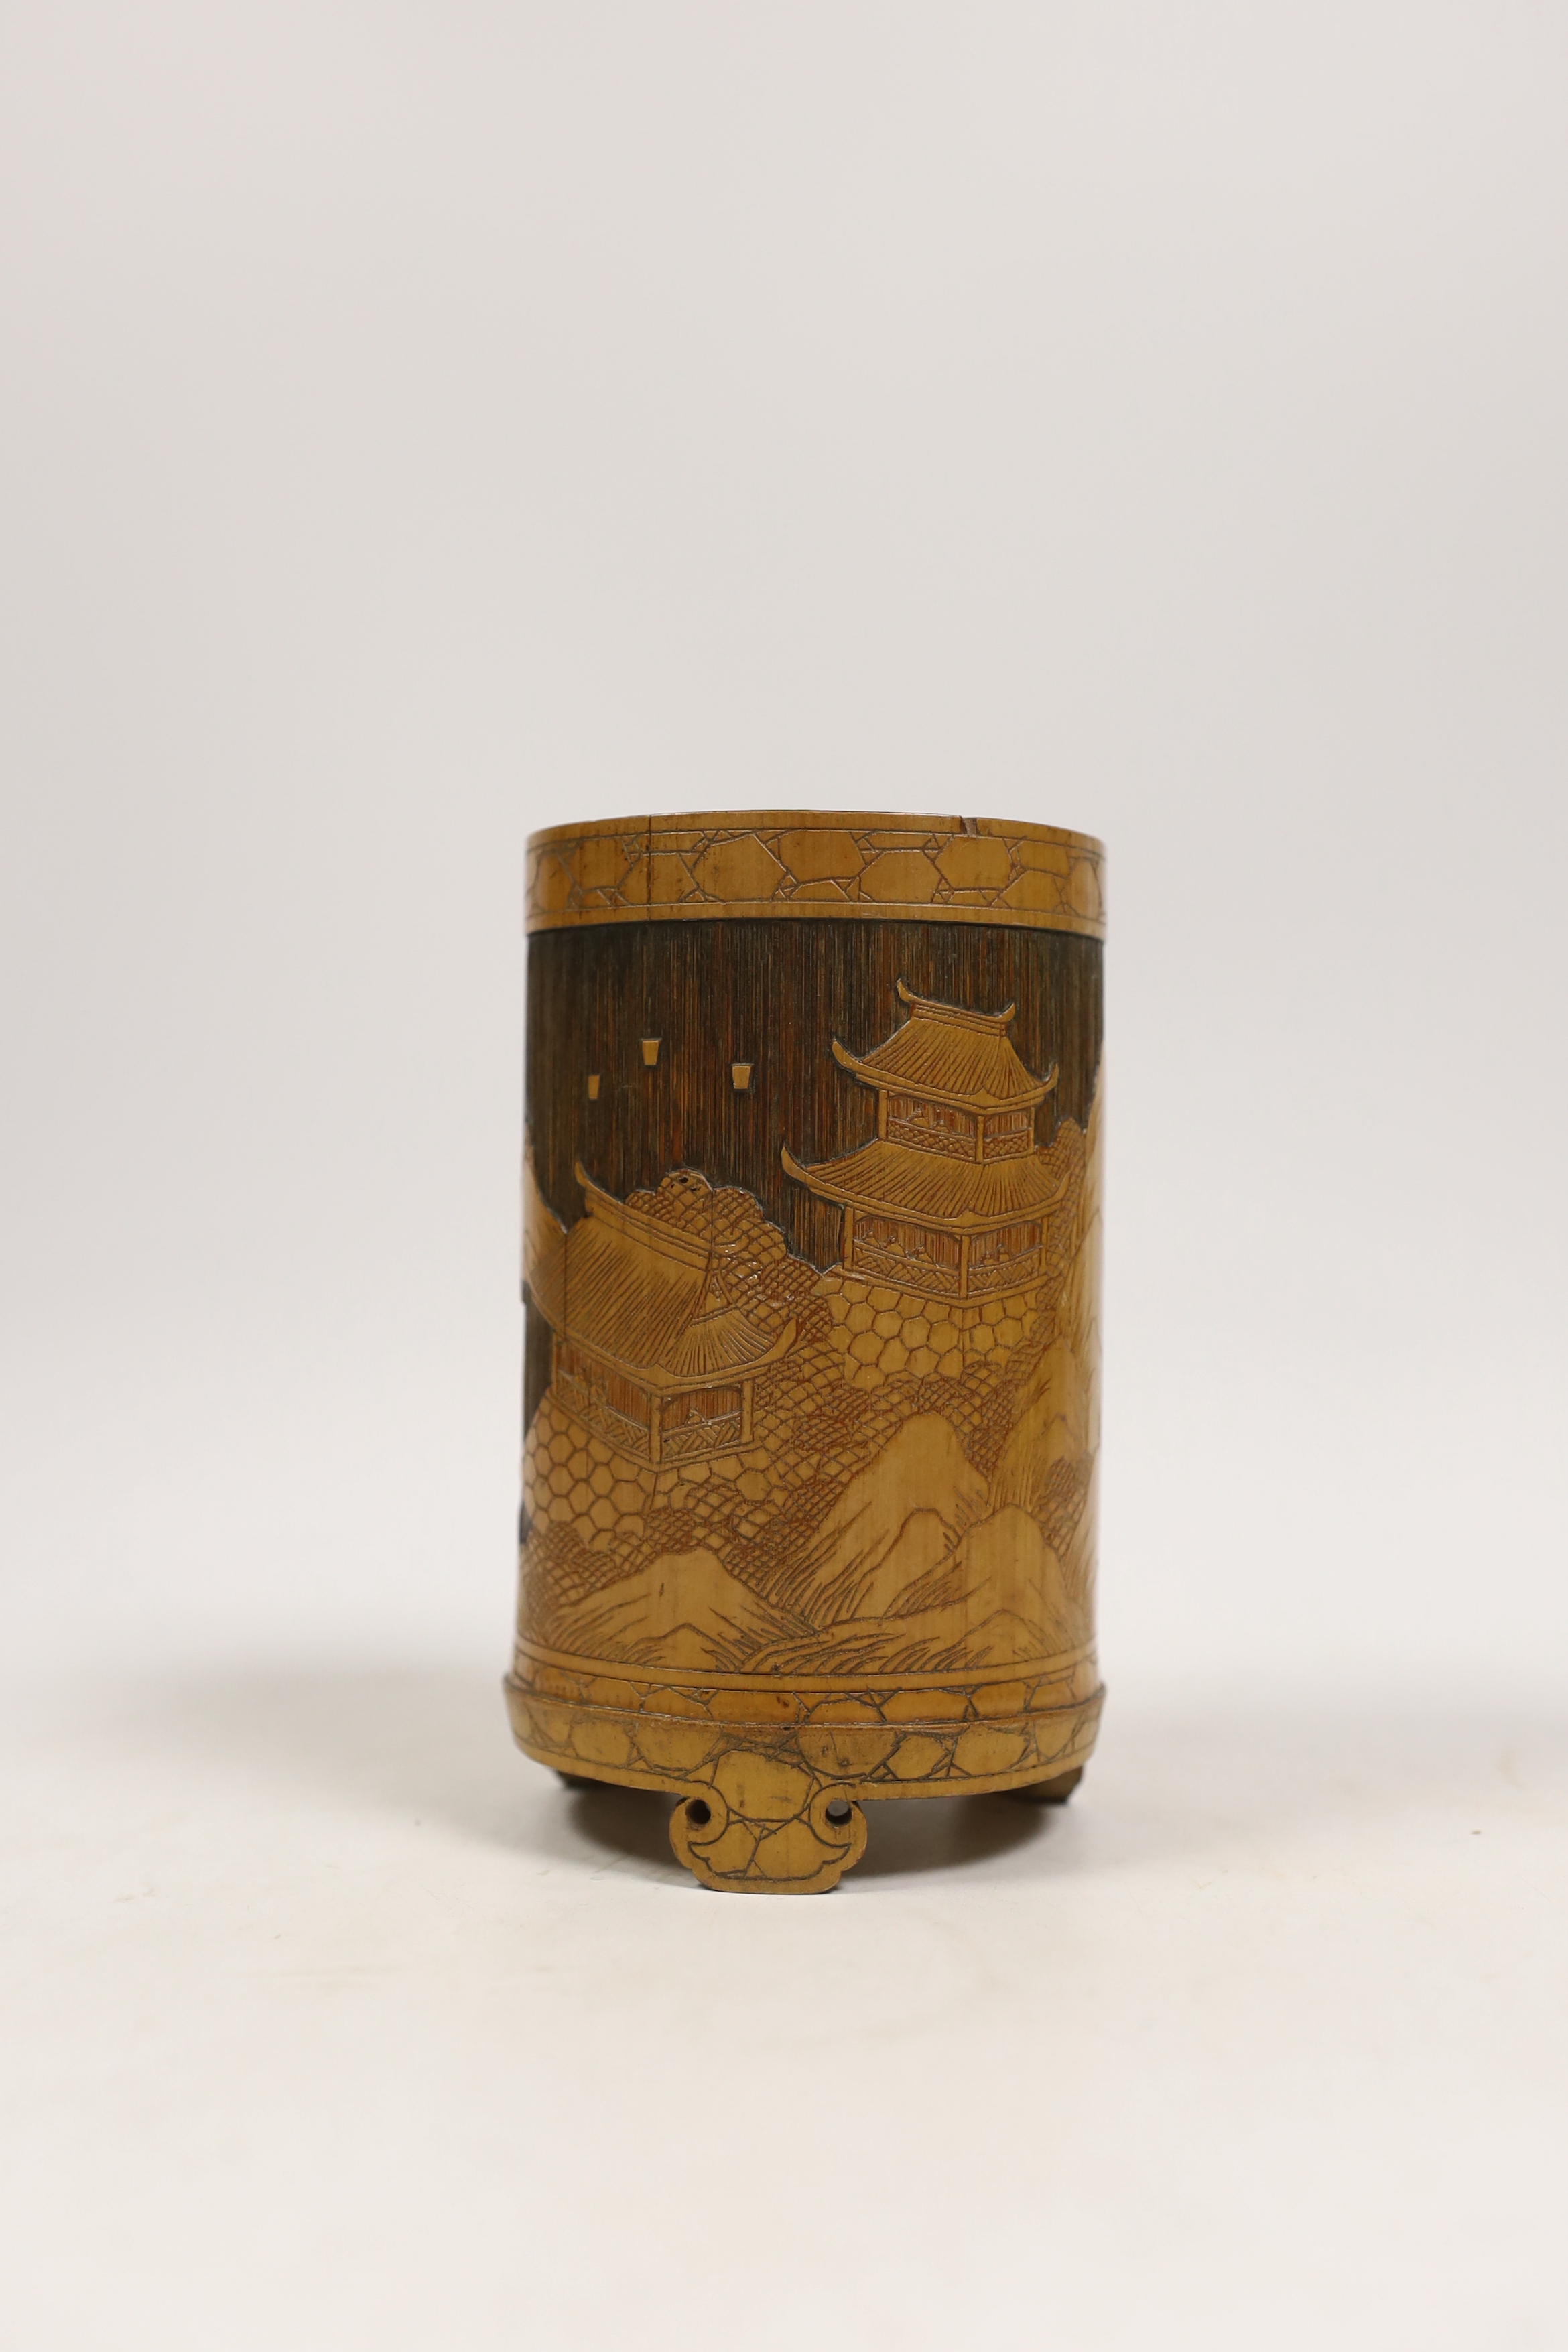 A Japanese bamboo brushpot carved with mountains and pagodas, 13cm high